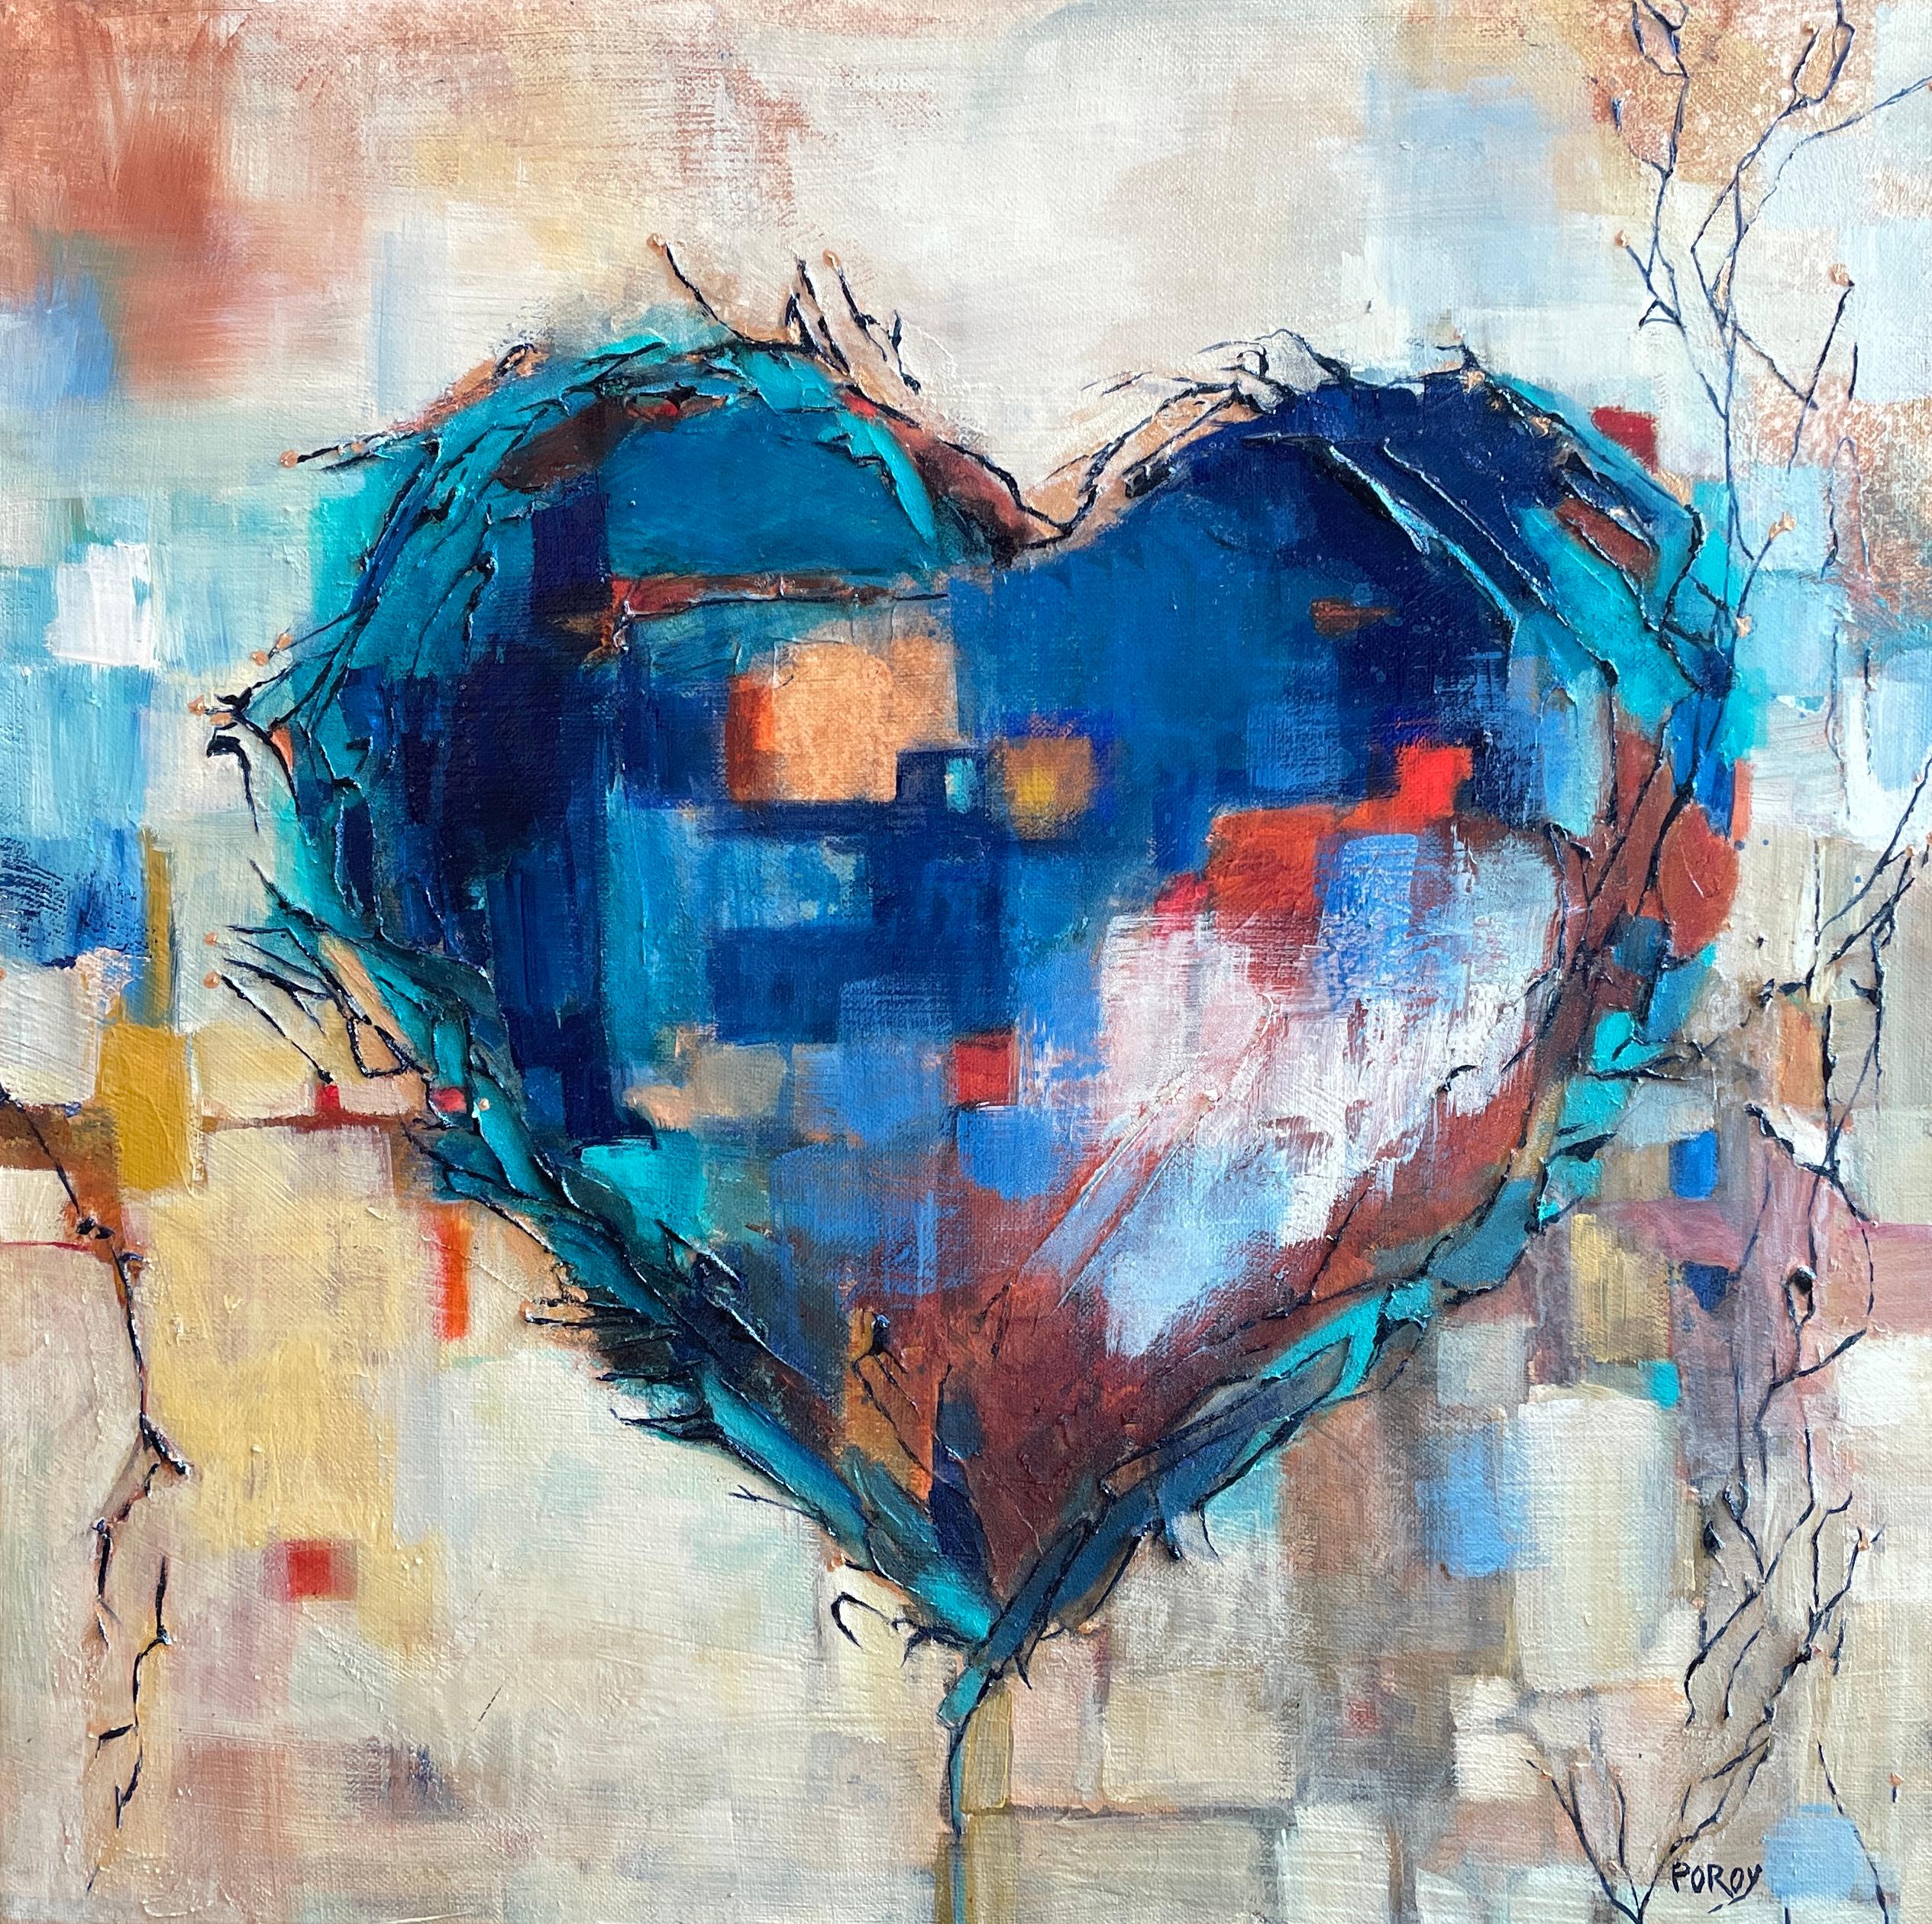 "Growing Love" by Maria Poroy is a 20" x 20" mixed media canvas that captures the essence of abstract expressionism through its textured layers and emotive color palette. At its heart lies a large, central figure of a heart, depicted in rich,